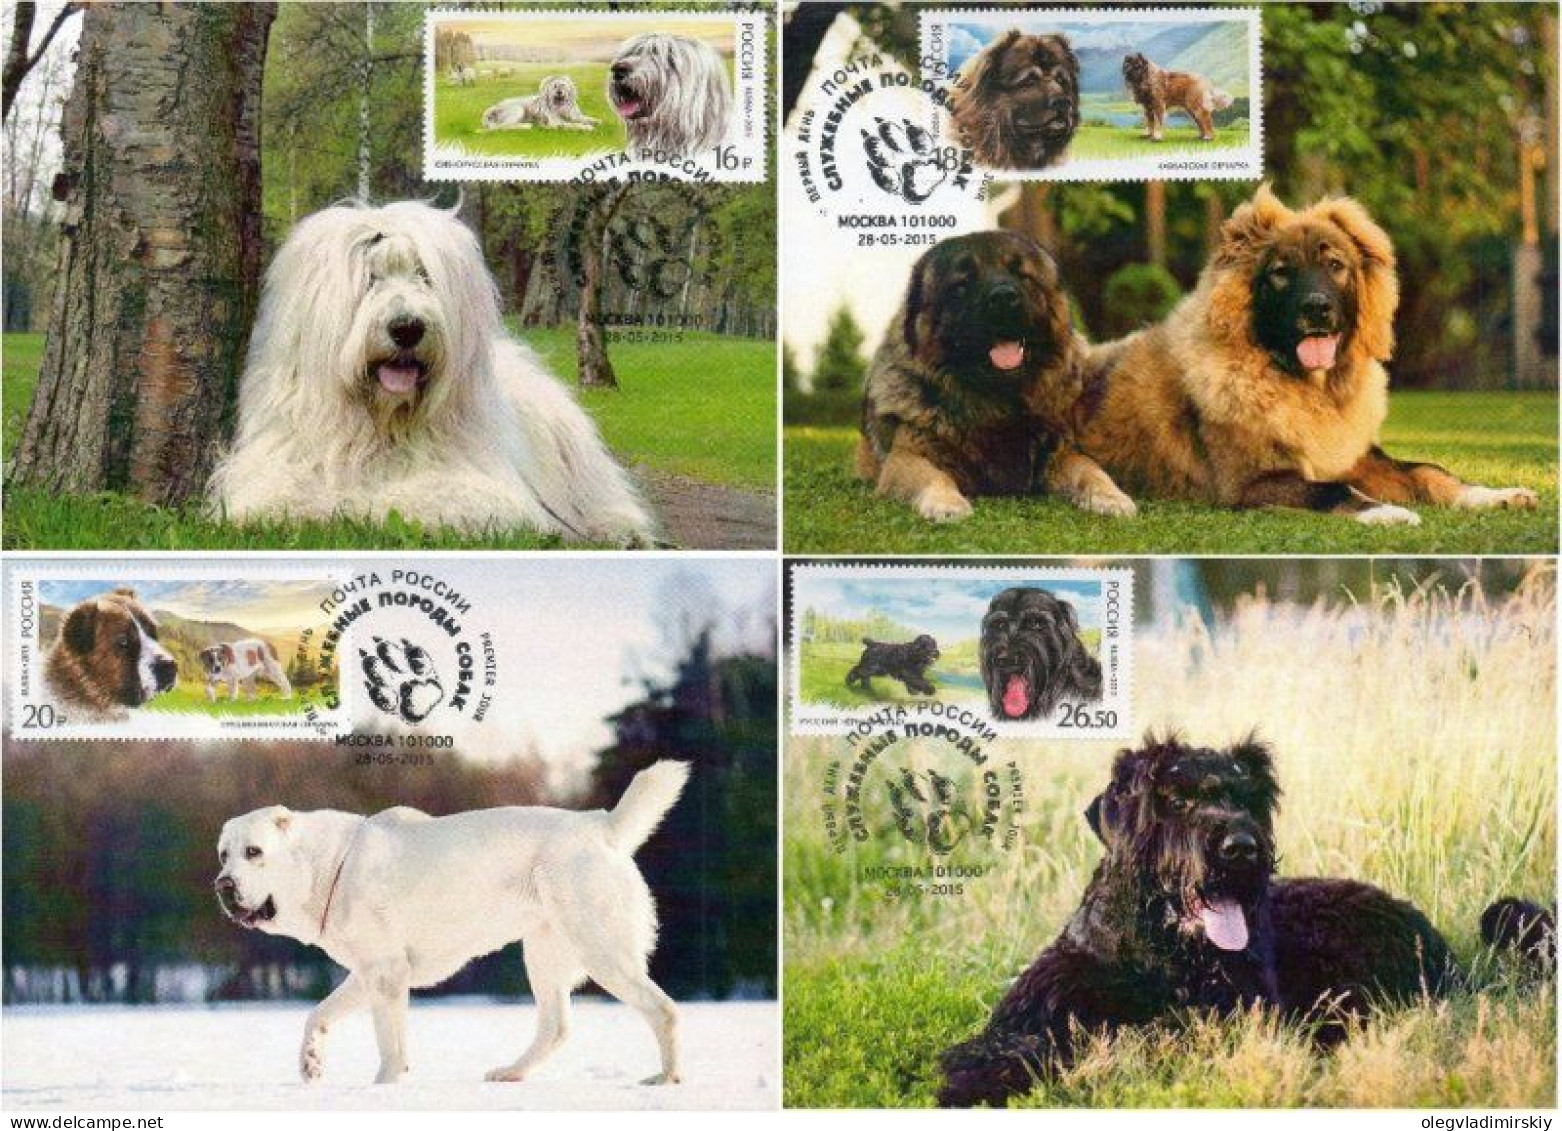 Russia Russland Russie 2015 Fauna Service Dogs Breeds Set Of 4 Maxicards - Cartes Maximum